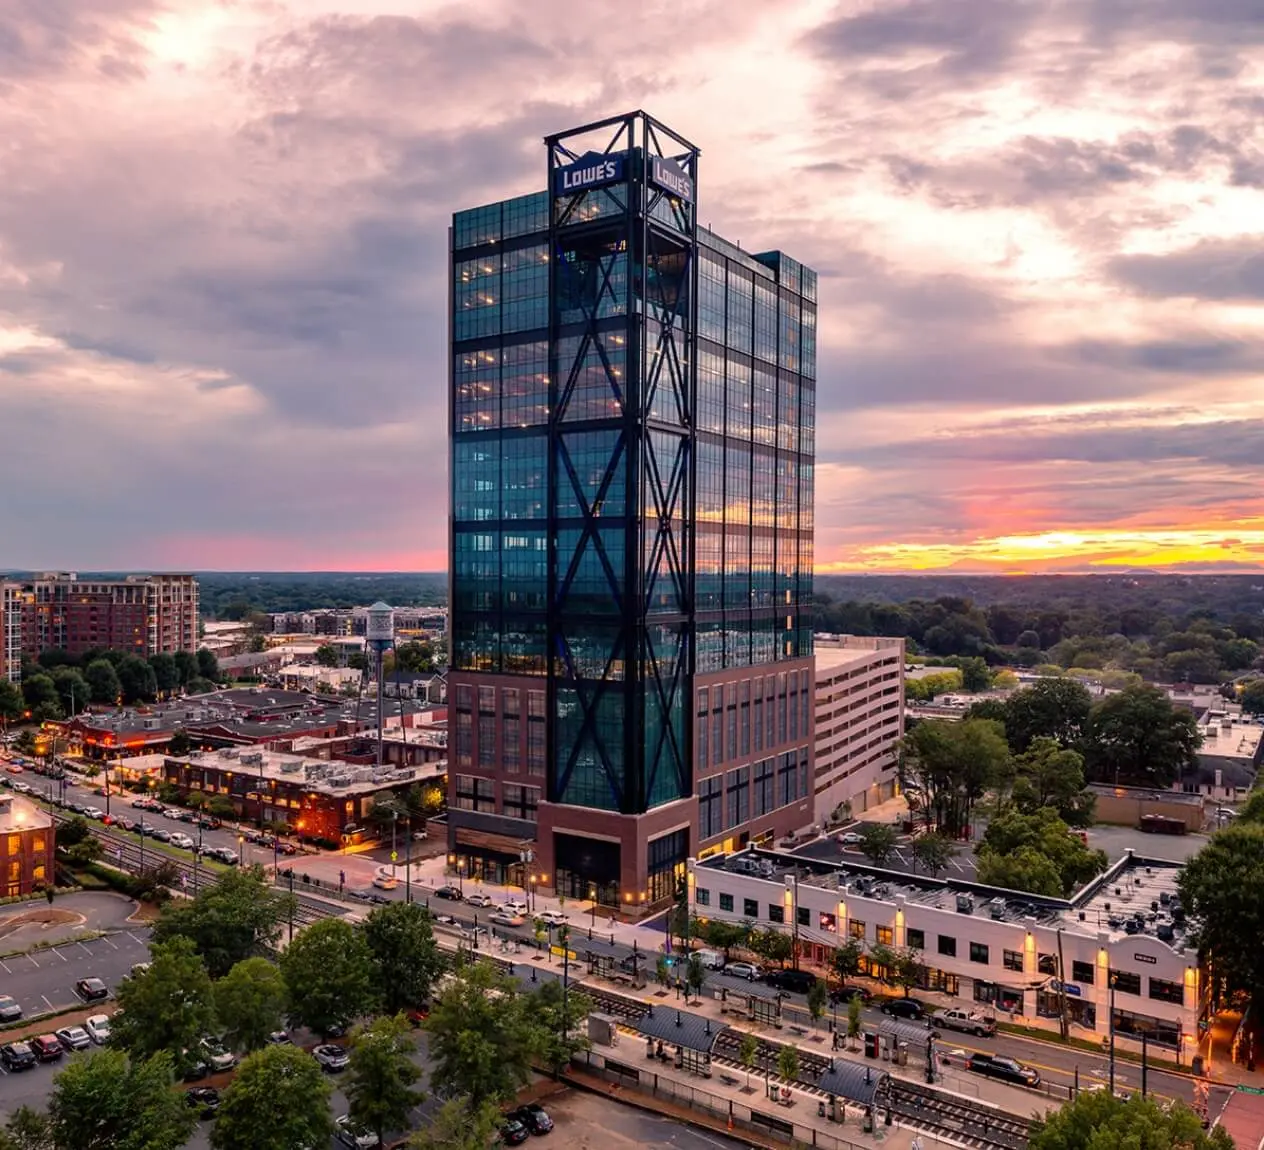 Lowe's Tech Hub high-rise office building in South End, Charlotte, NC mostly glass and black steel exterior at sunset